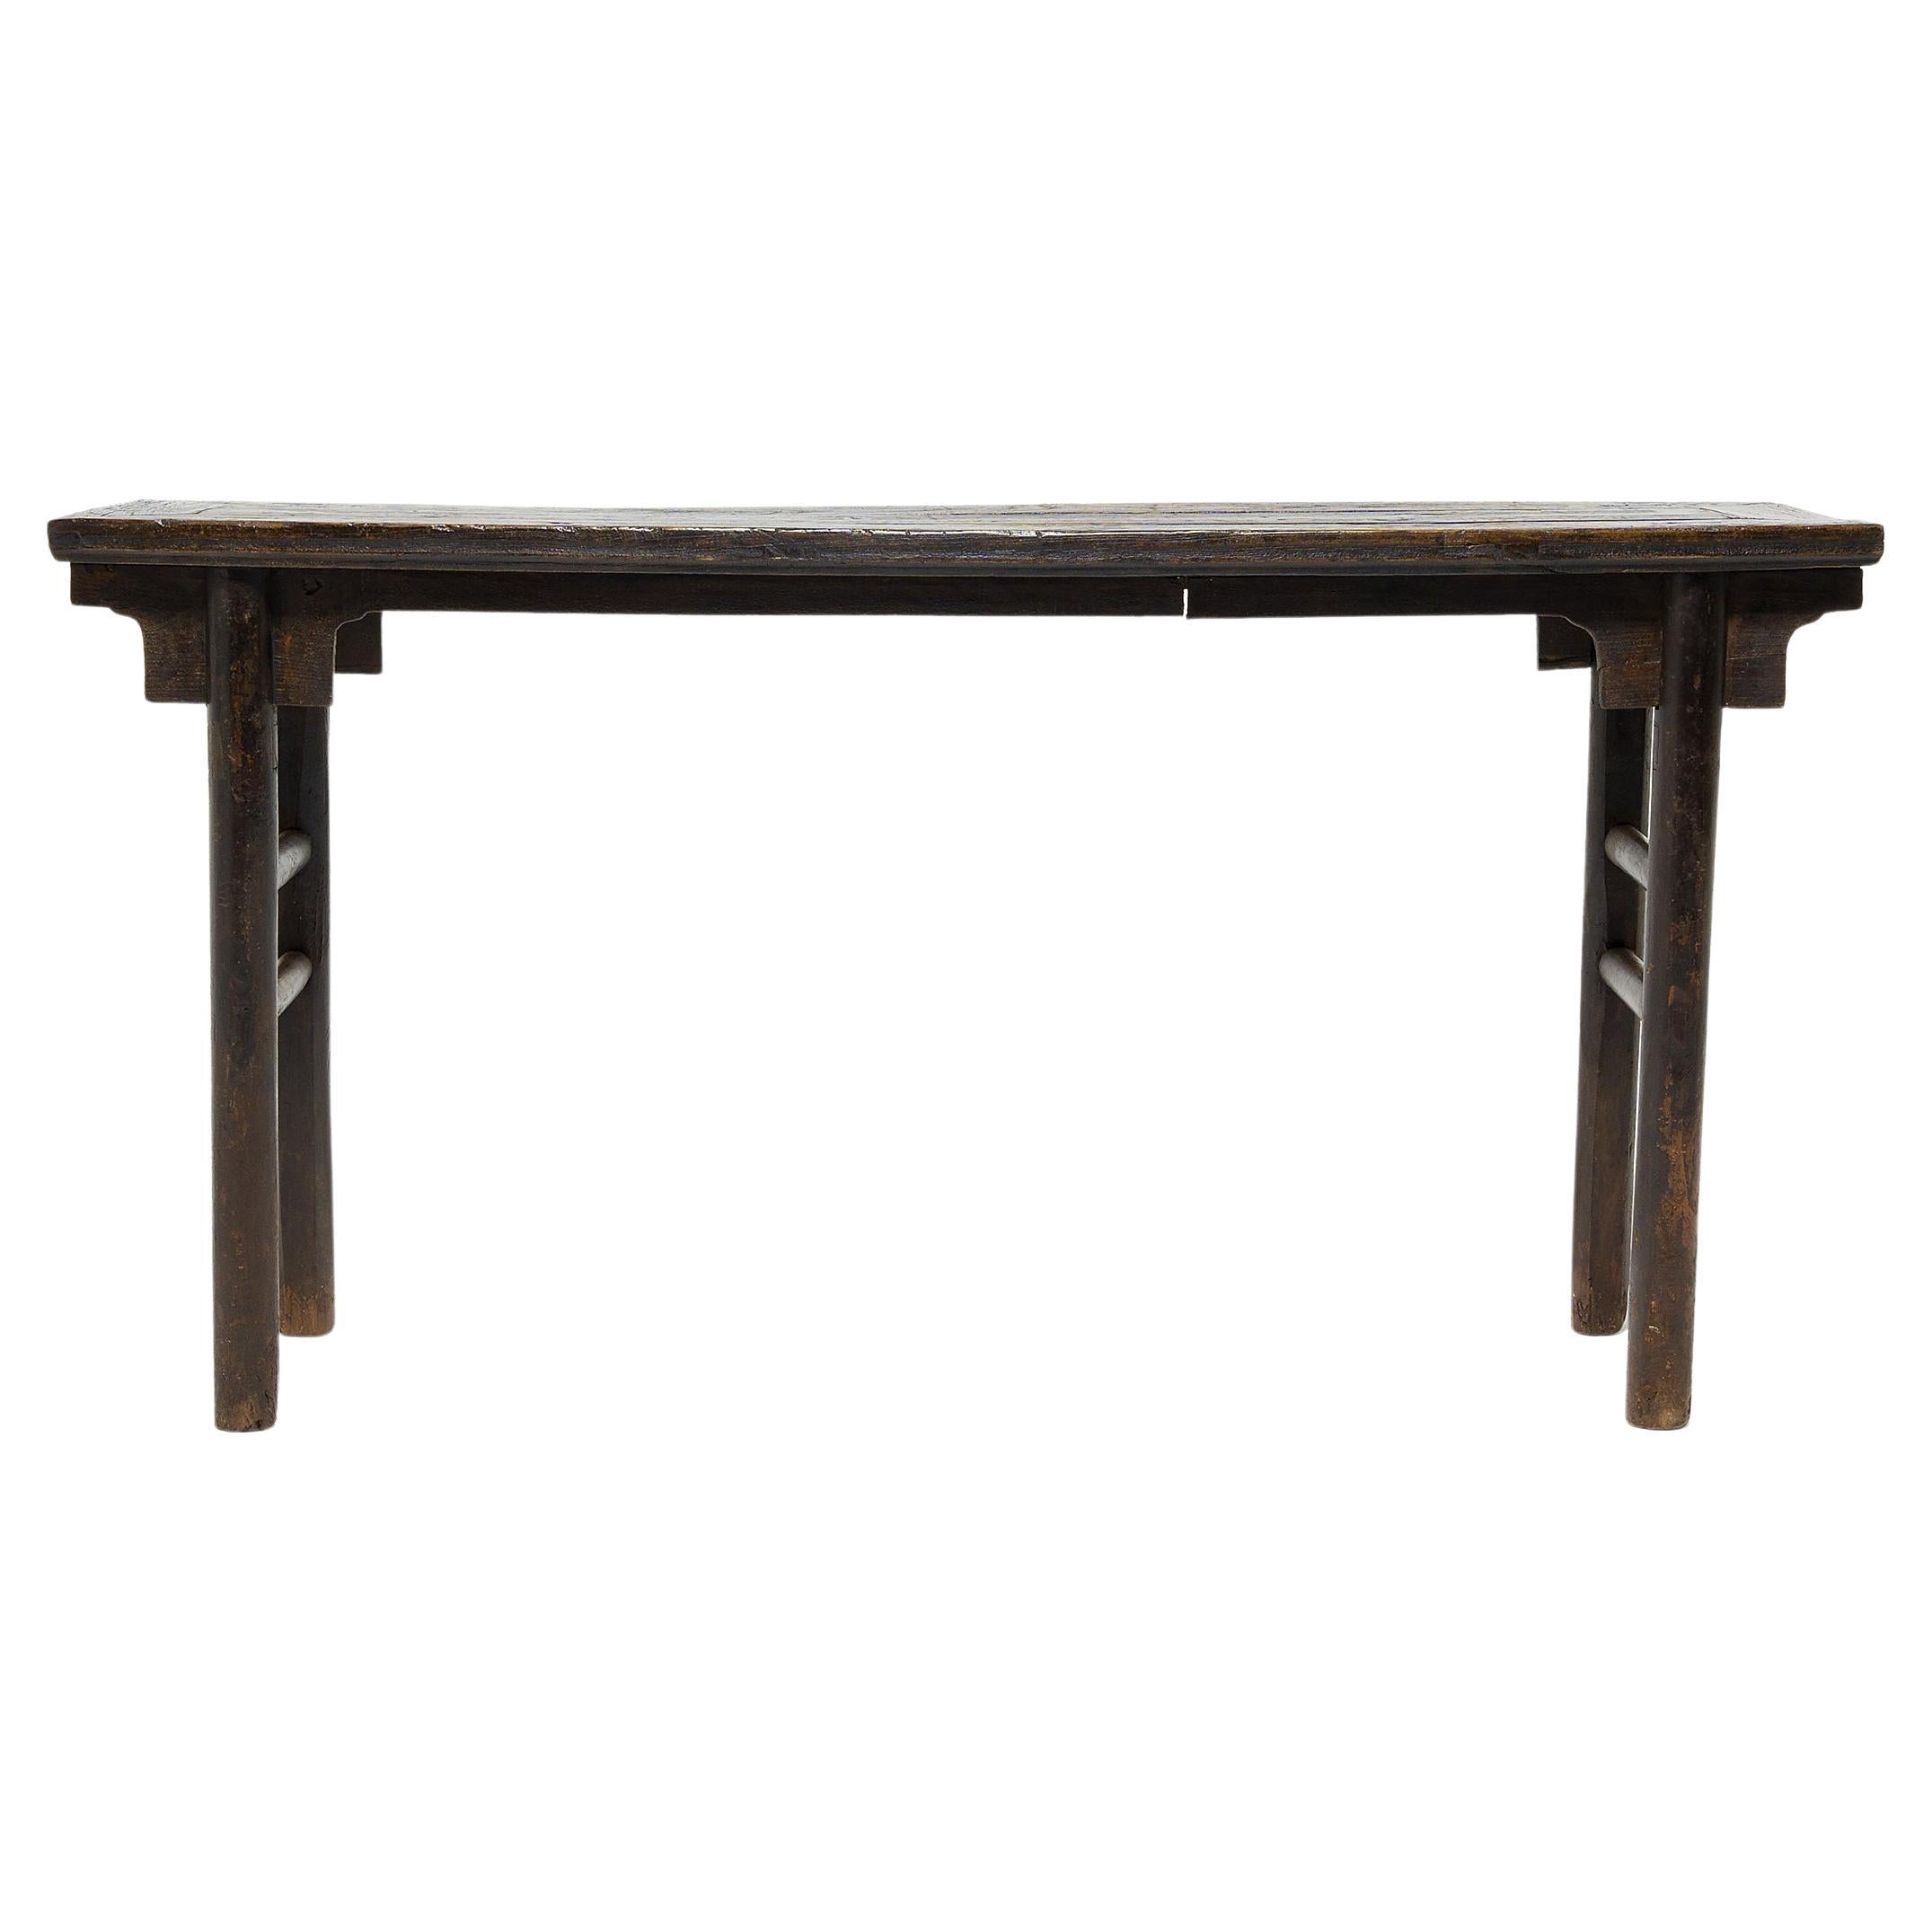 Chinese Round Leg Altar Table, c. 1800